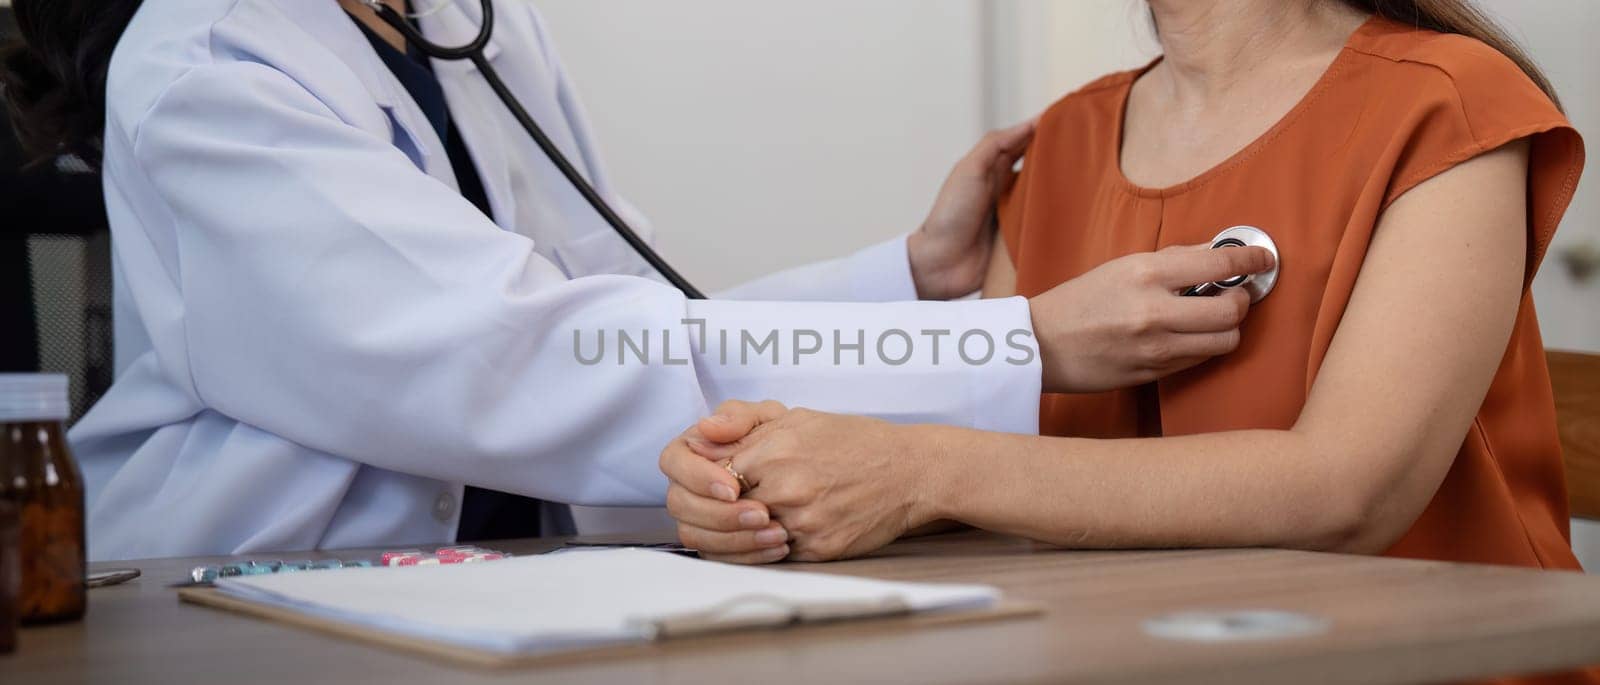 Elderly woman asian patient are check up health while a woman doctor use a stethoscope to hear heart rate. elderly healthcare concept by nateemee